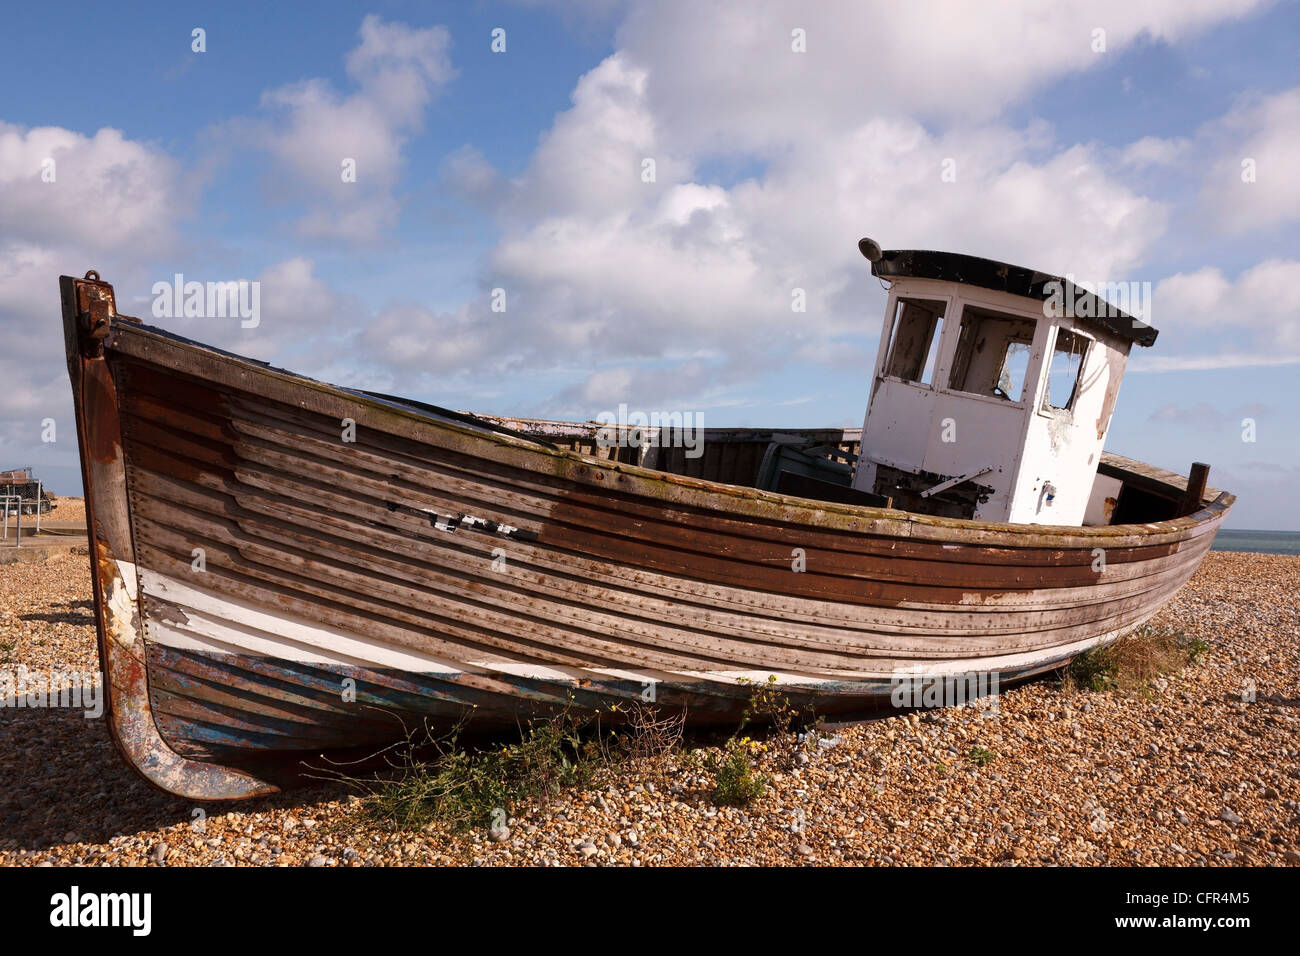 Old, clinker built, wooden fishing boat on shingle beach, Eastbourne, East Sussex, England, UK Stock Photo